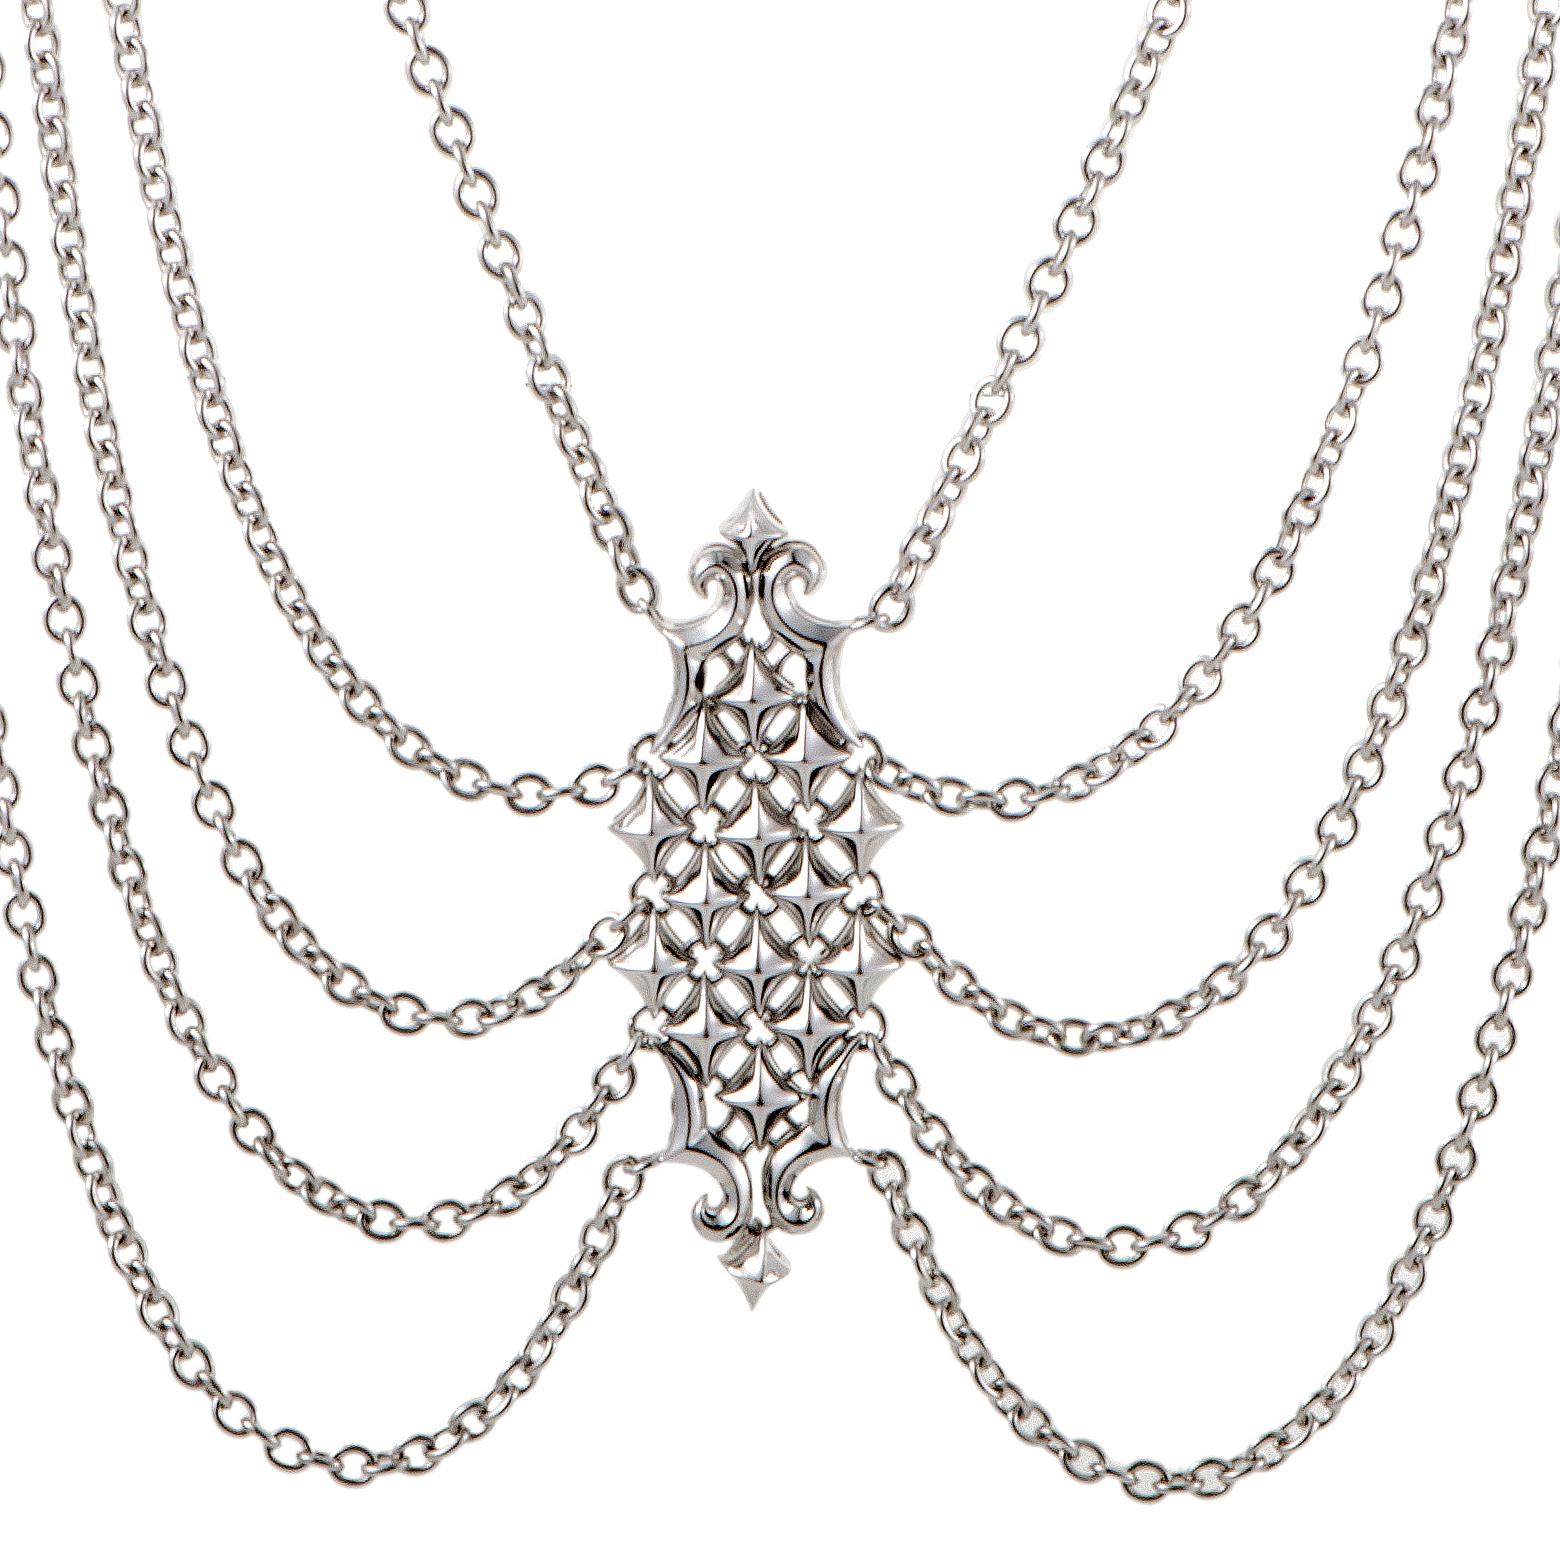 Mesmerizing, wonderfully bright and simply astonishing, this extraordinary lariat necklace from Stephen Websters Superstud collection is comprised of scintillating chains and intriguing decorations all expertly crafted from white rhodium-plated